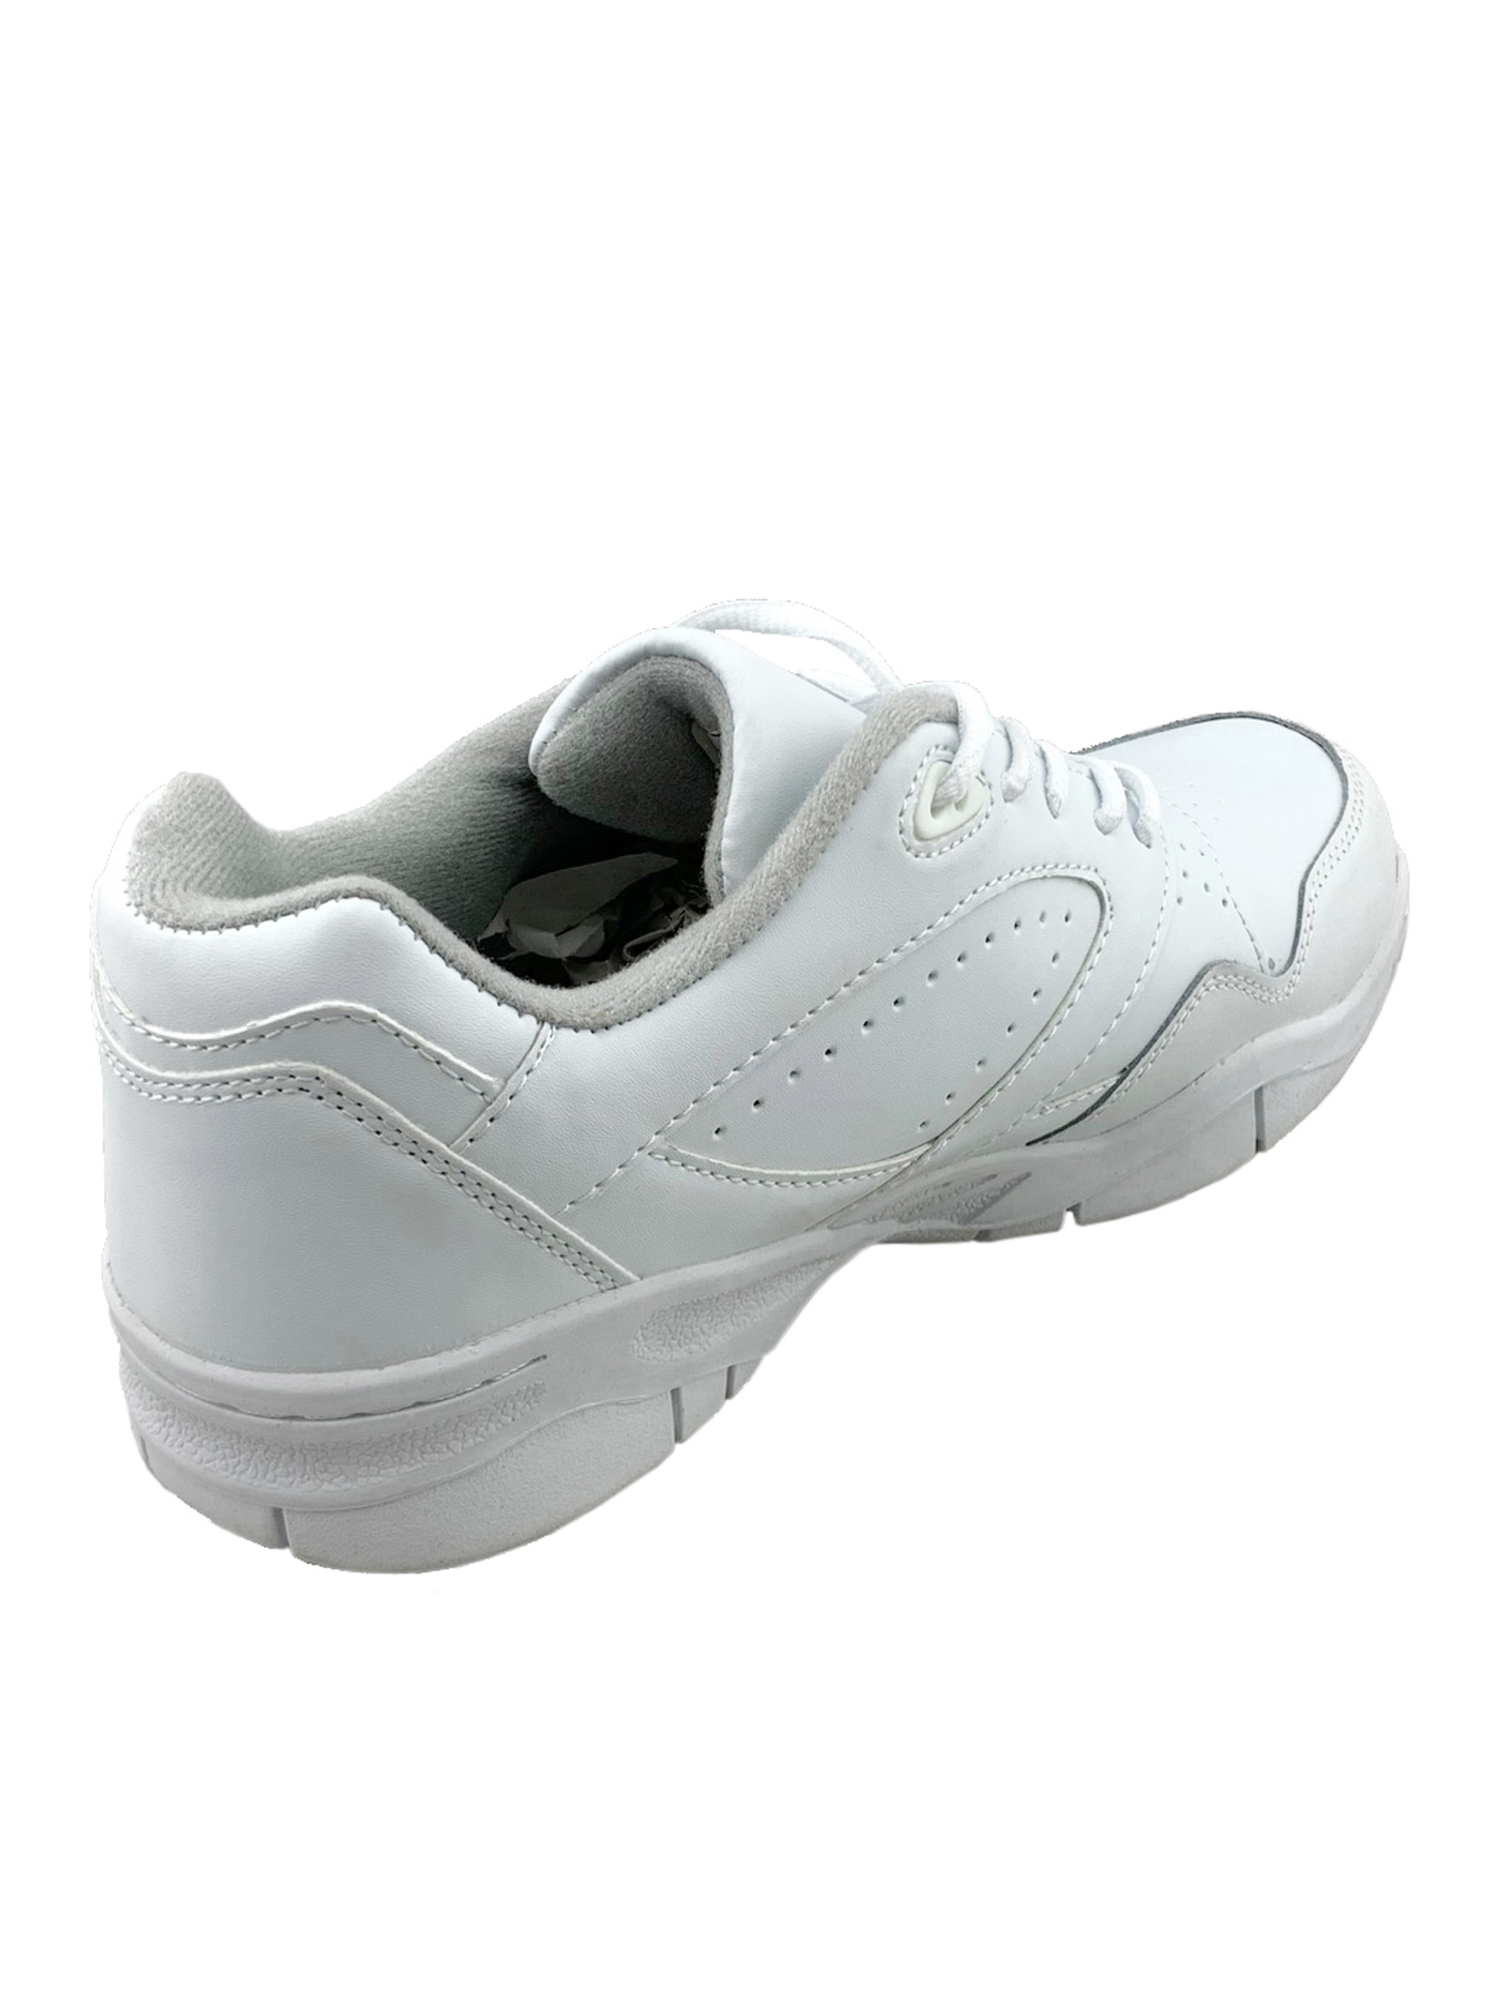 Tanleewa Men's Leather White Sports Shoes Lightweight Sneakers Breathable Casual Shoe Size 11.5 - image 5 of 5